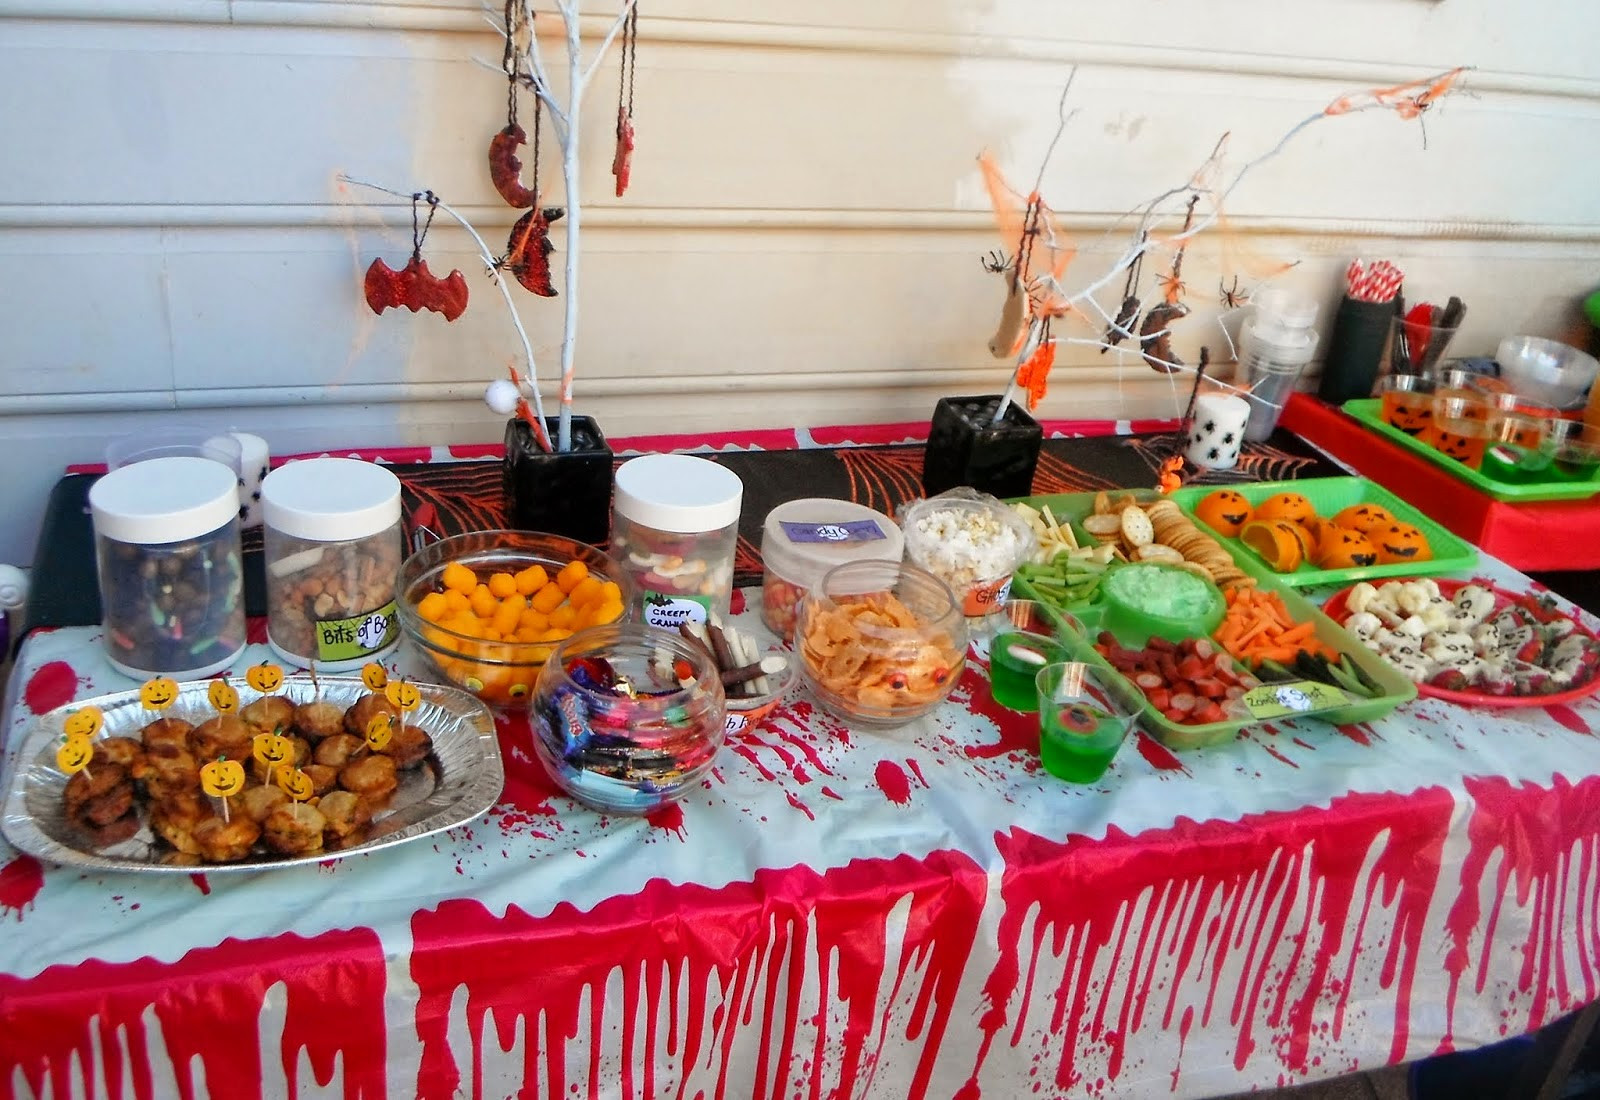 Food Ideas For Kids Birthday Party
 TASTY CATERING Birthday Party Food Ideas